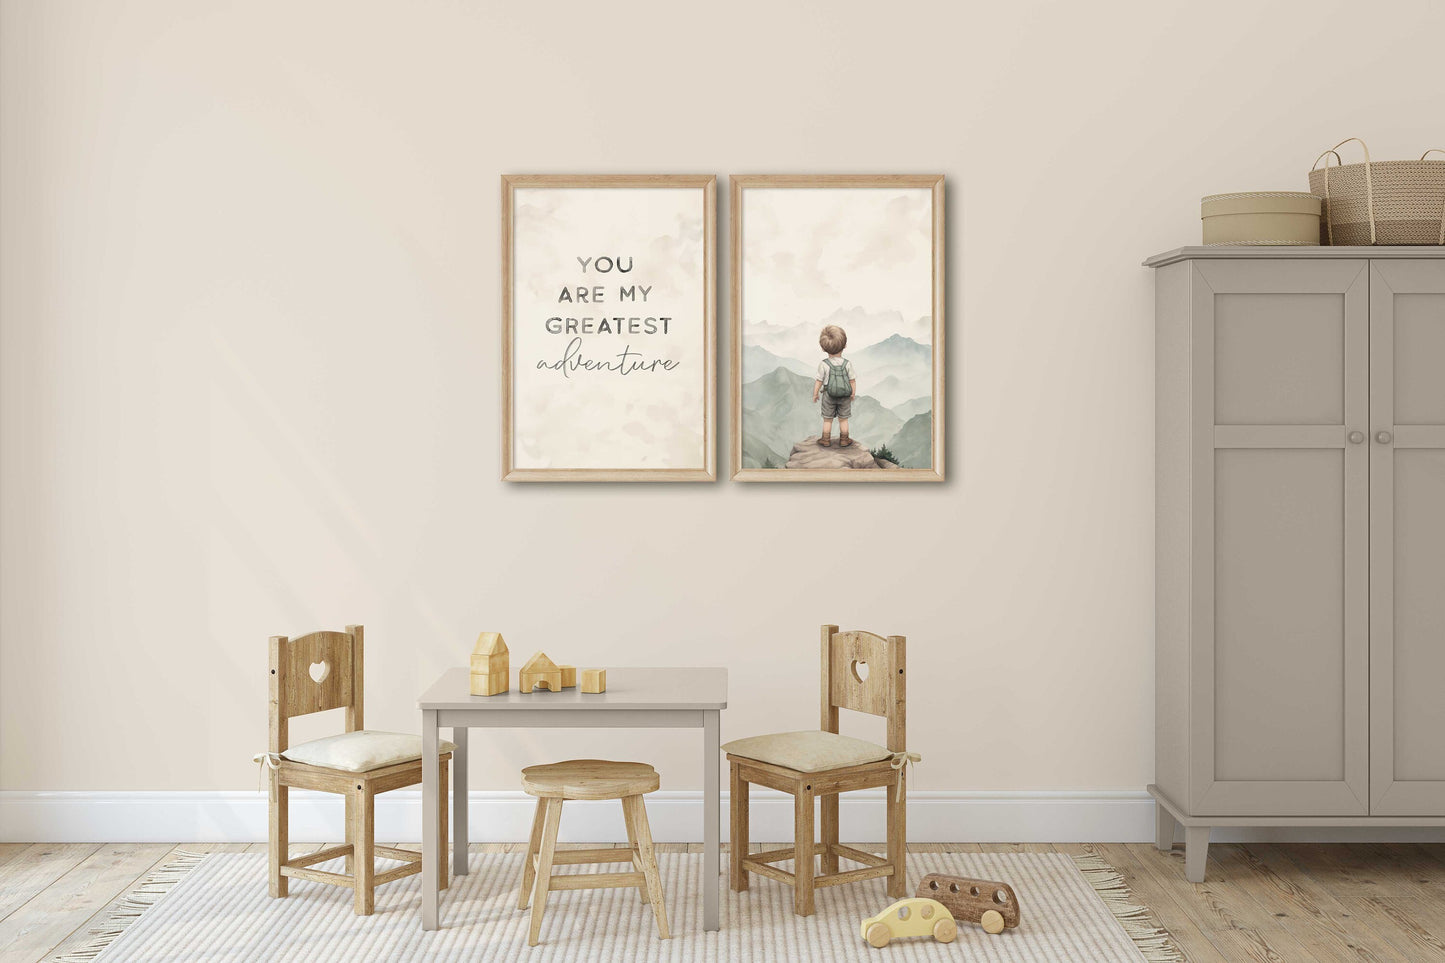 Inspirational Boy Adventure Quote Art - 'You Are My Greatest Adventure', Mountain View, Set of 2, Nursery Decor, Printable Wall Art